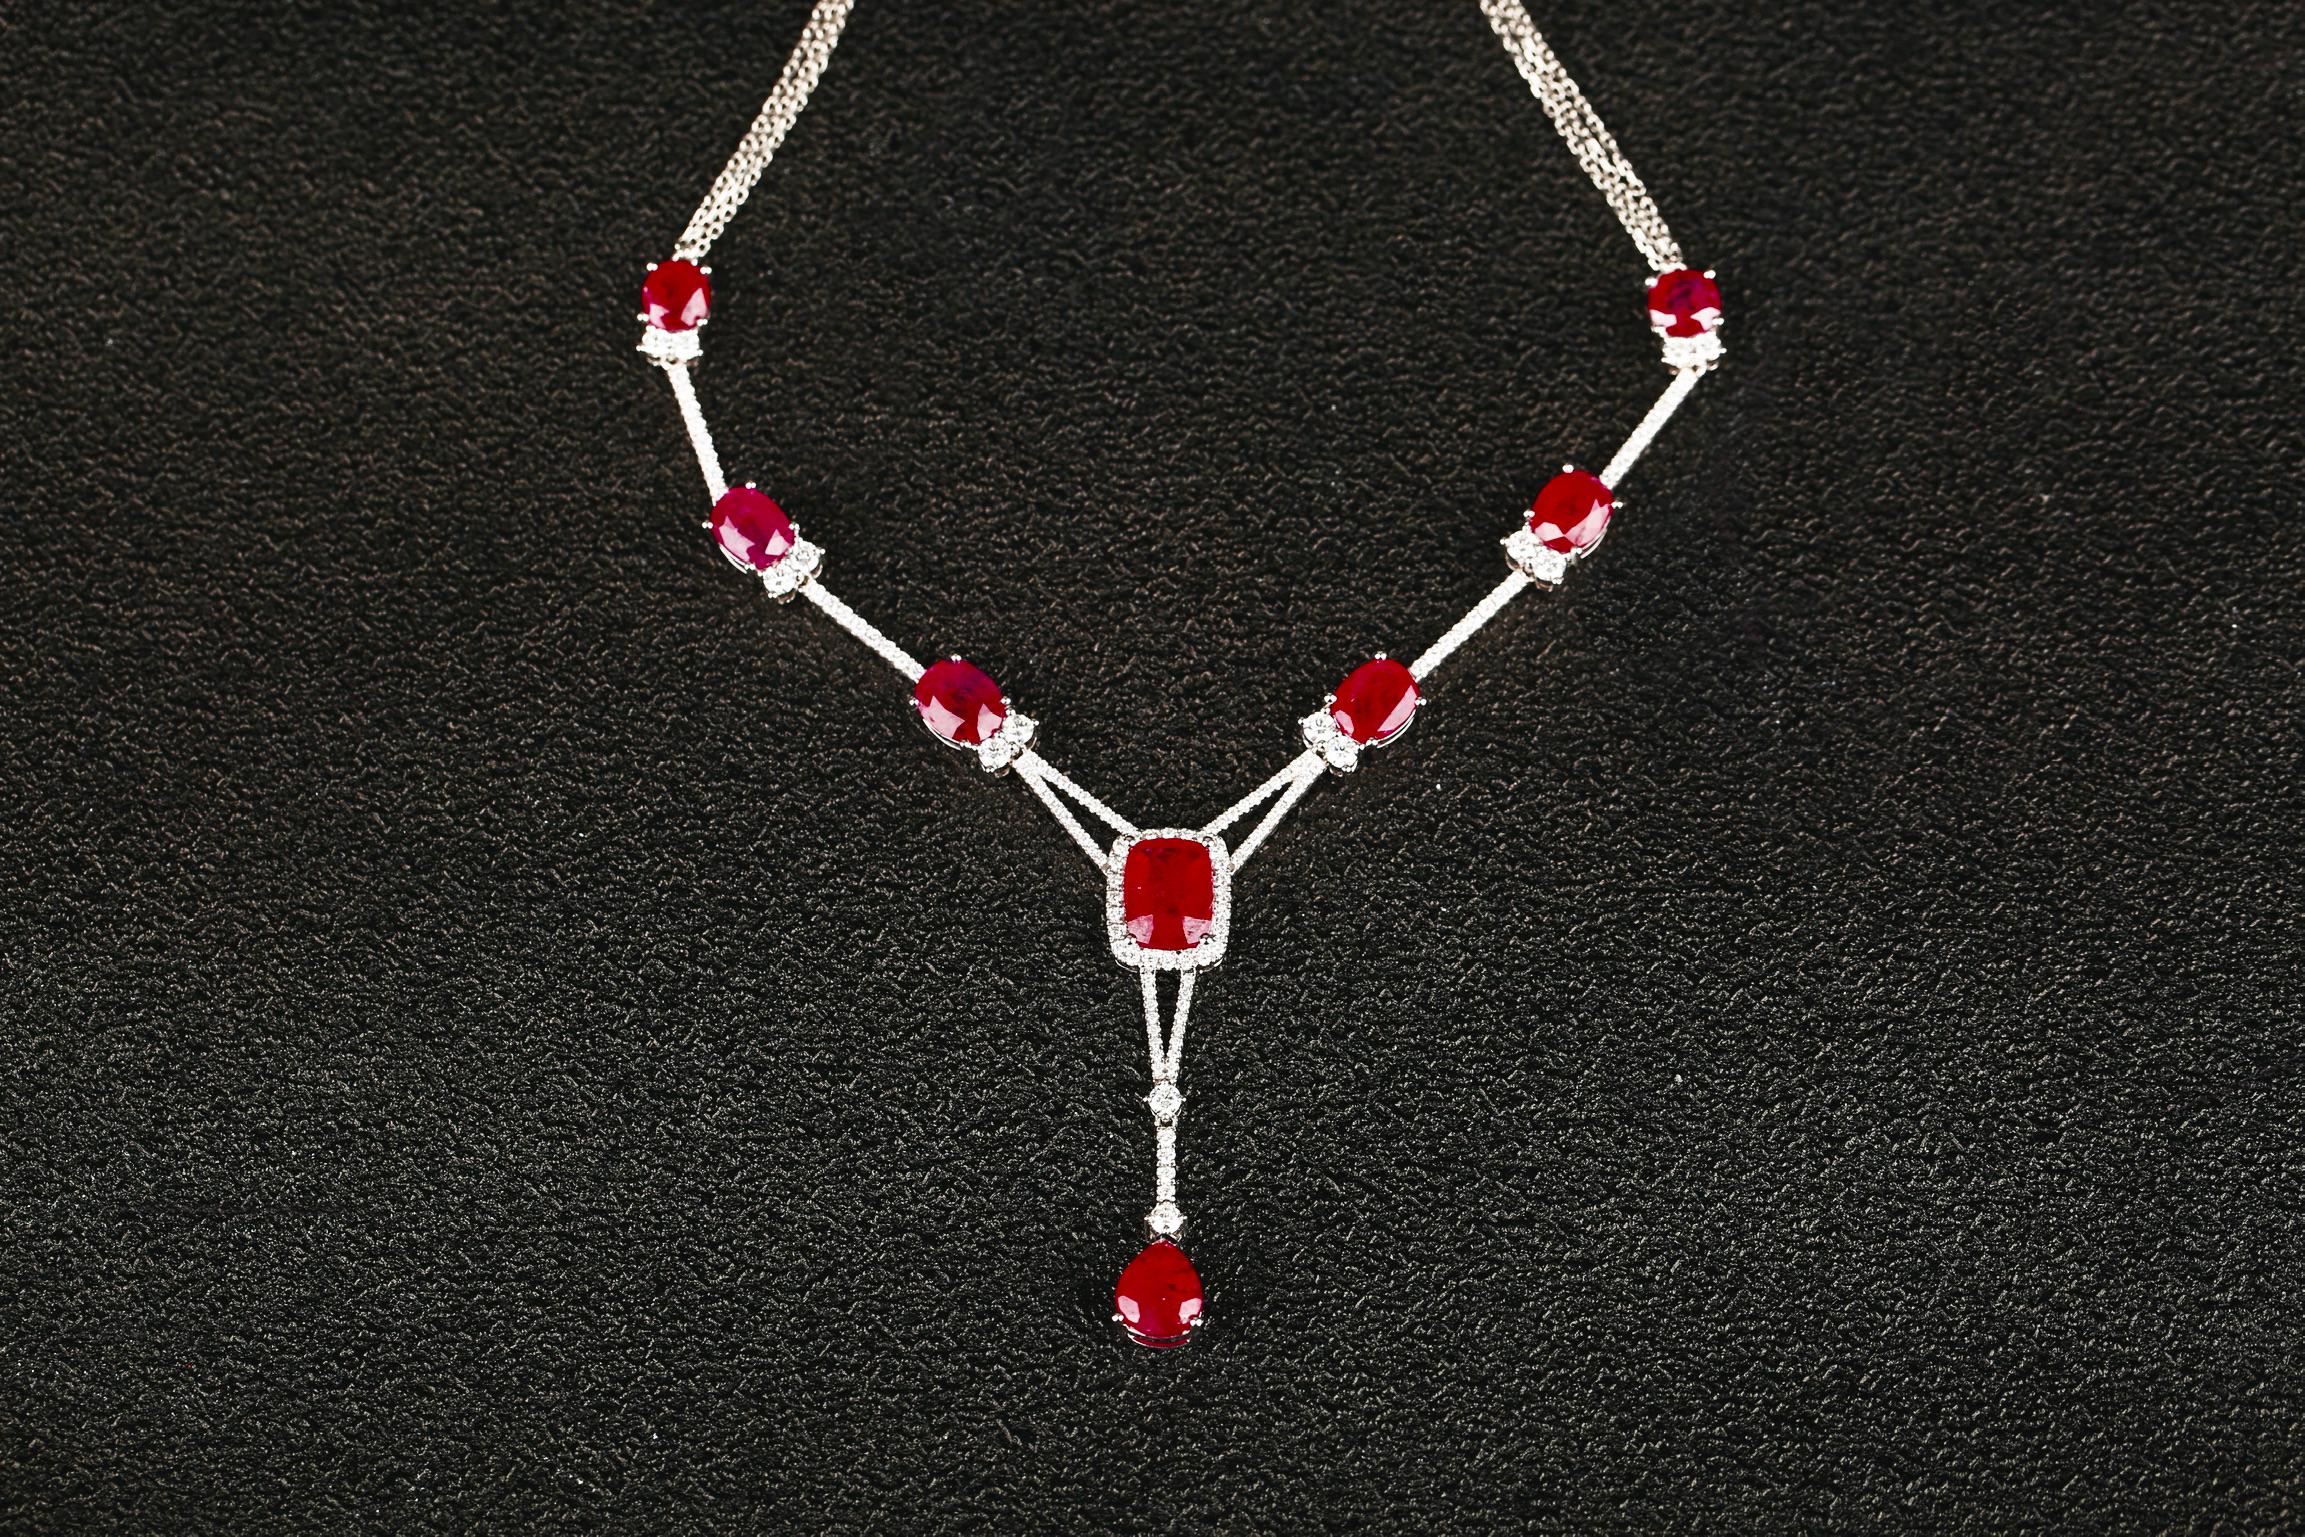 An entry level Ruby and Diamond Necklace in 18K White Gold. This is the prefect entry level ruby Necklace as it is not too grand but at the same time it is well designed and looks expensive. You have 3 smaller ruby on one side of the necklace and a